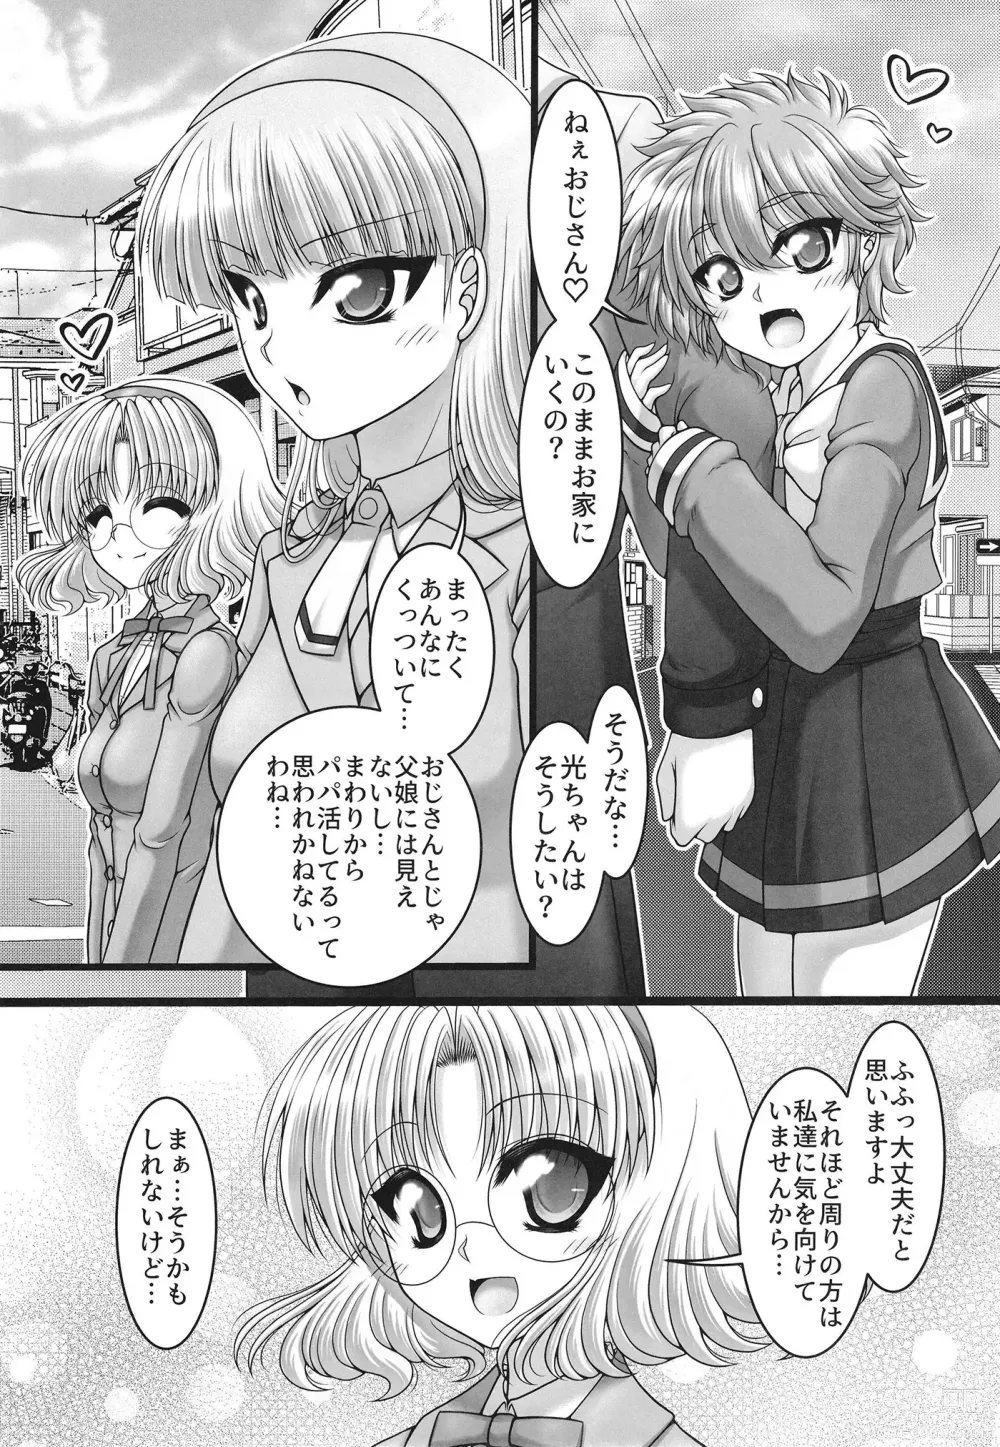 Page 5 of doujinshi Funny Night